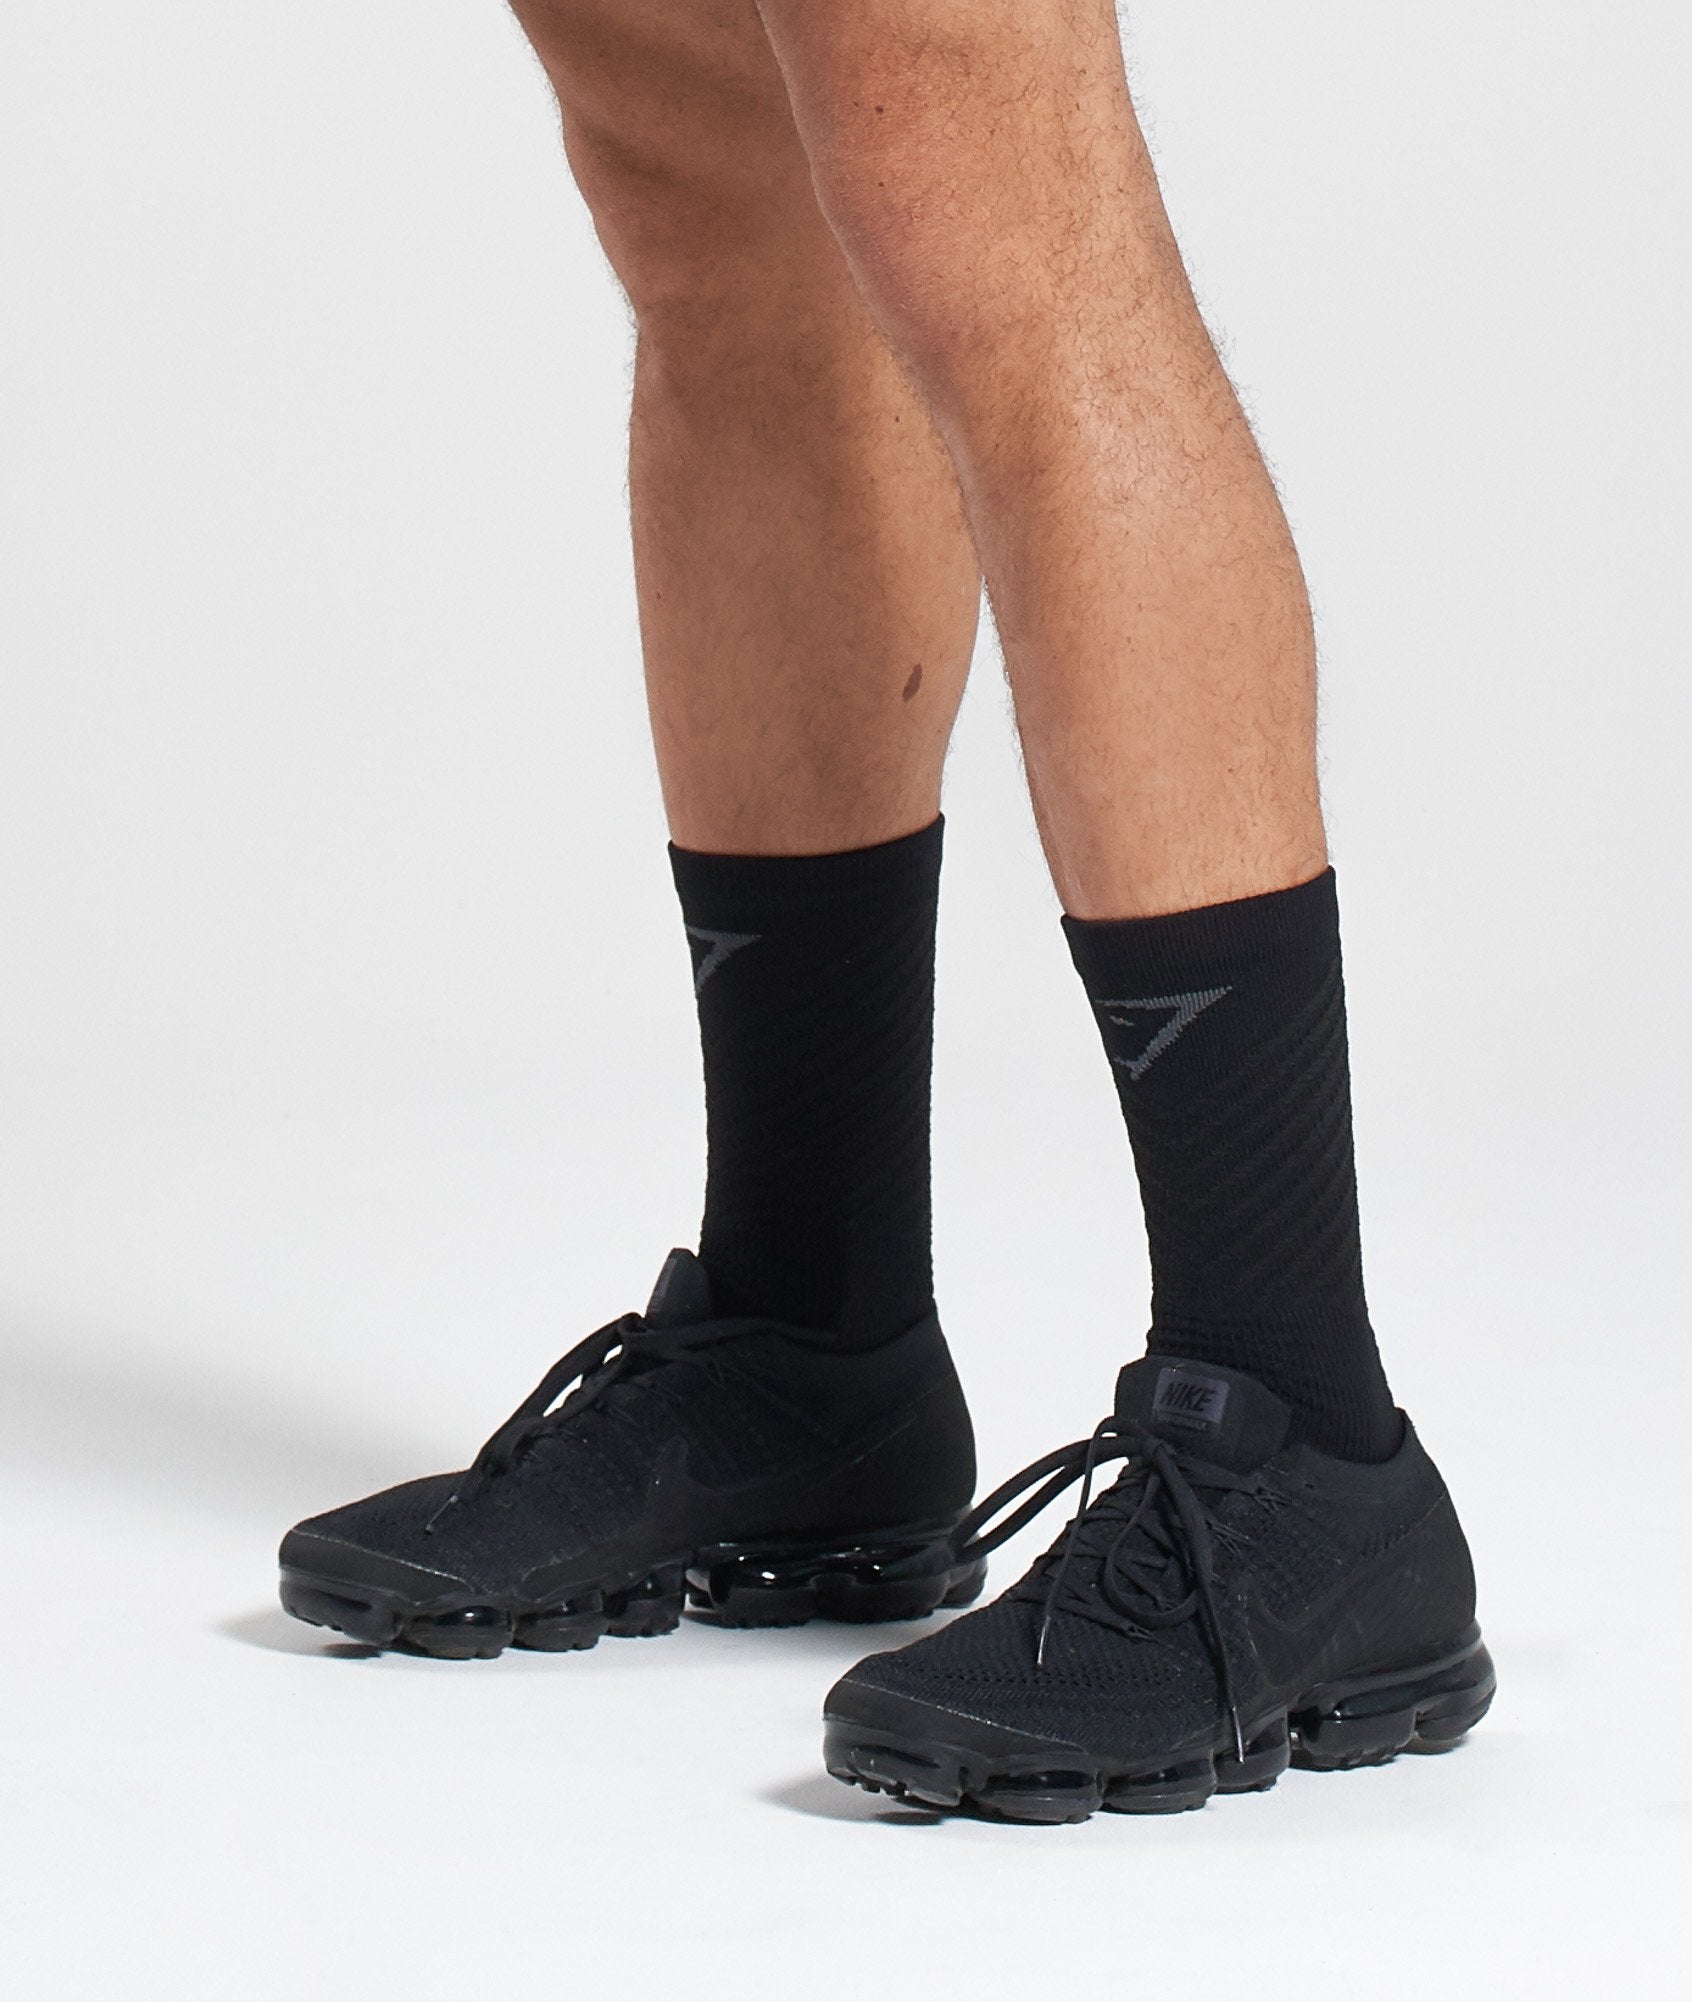 Thick Tech Crew Socks in Black - view 3